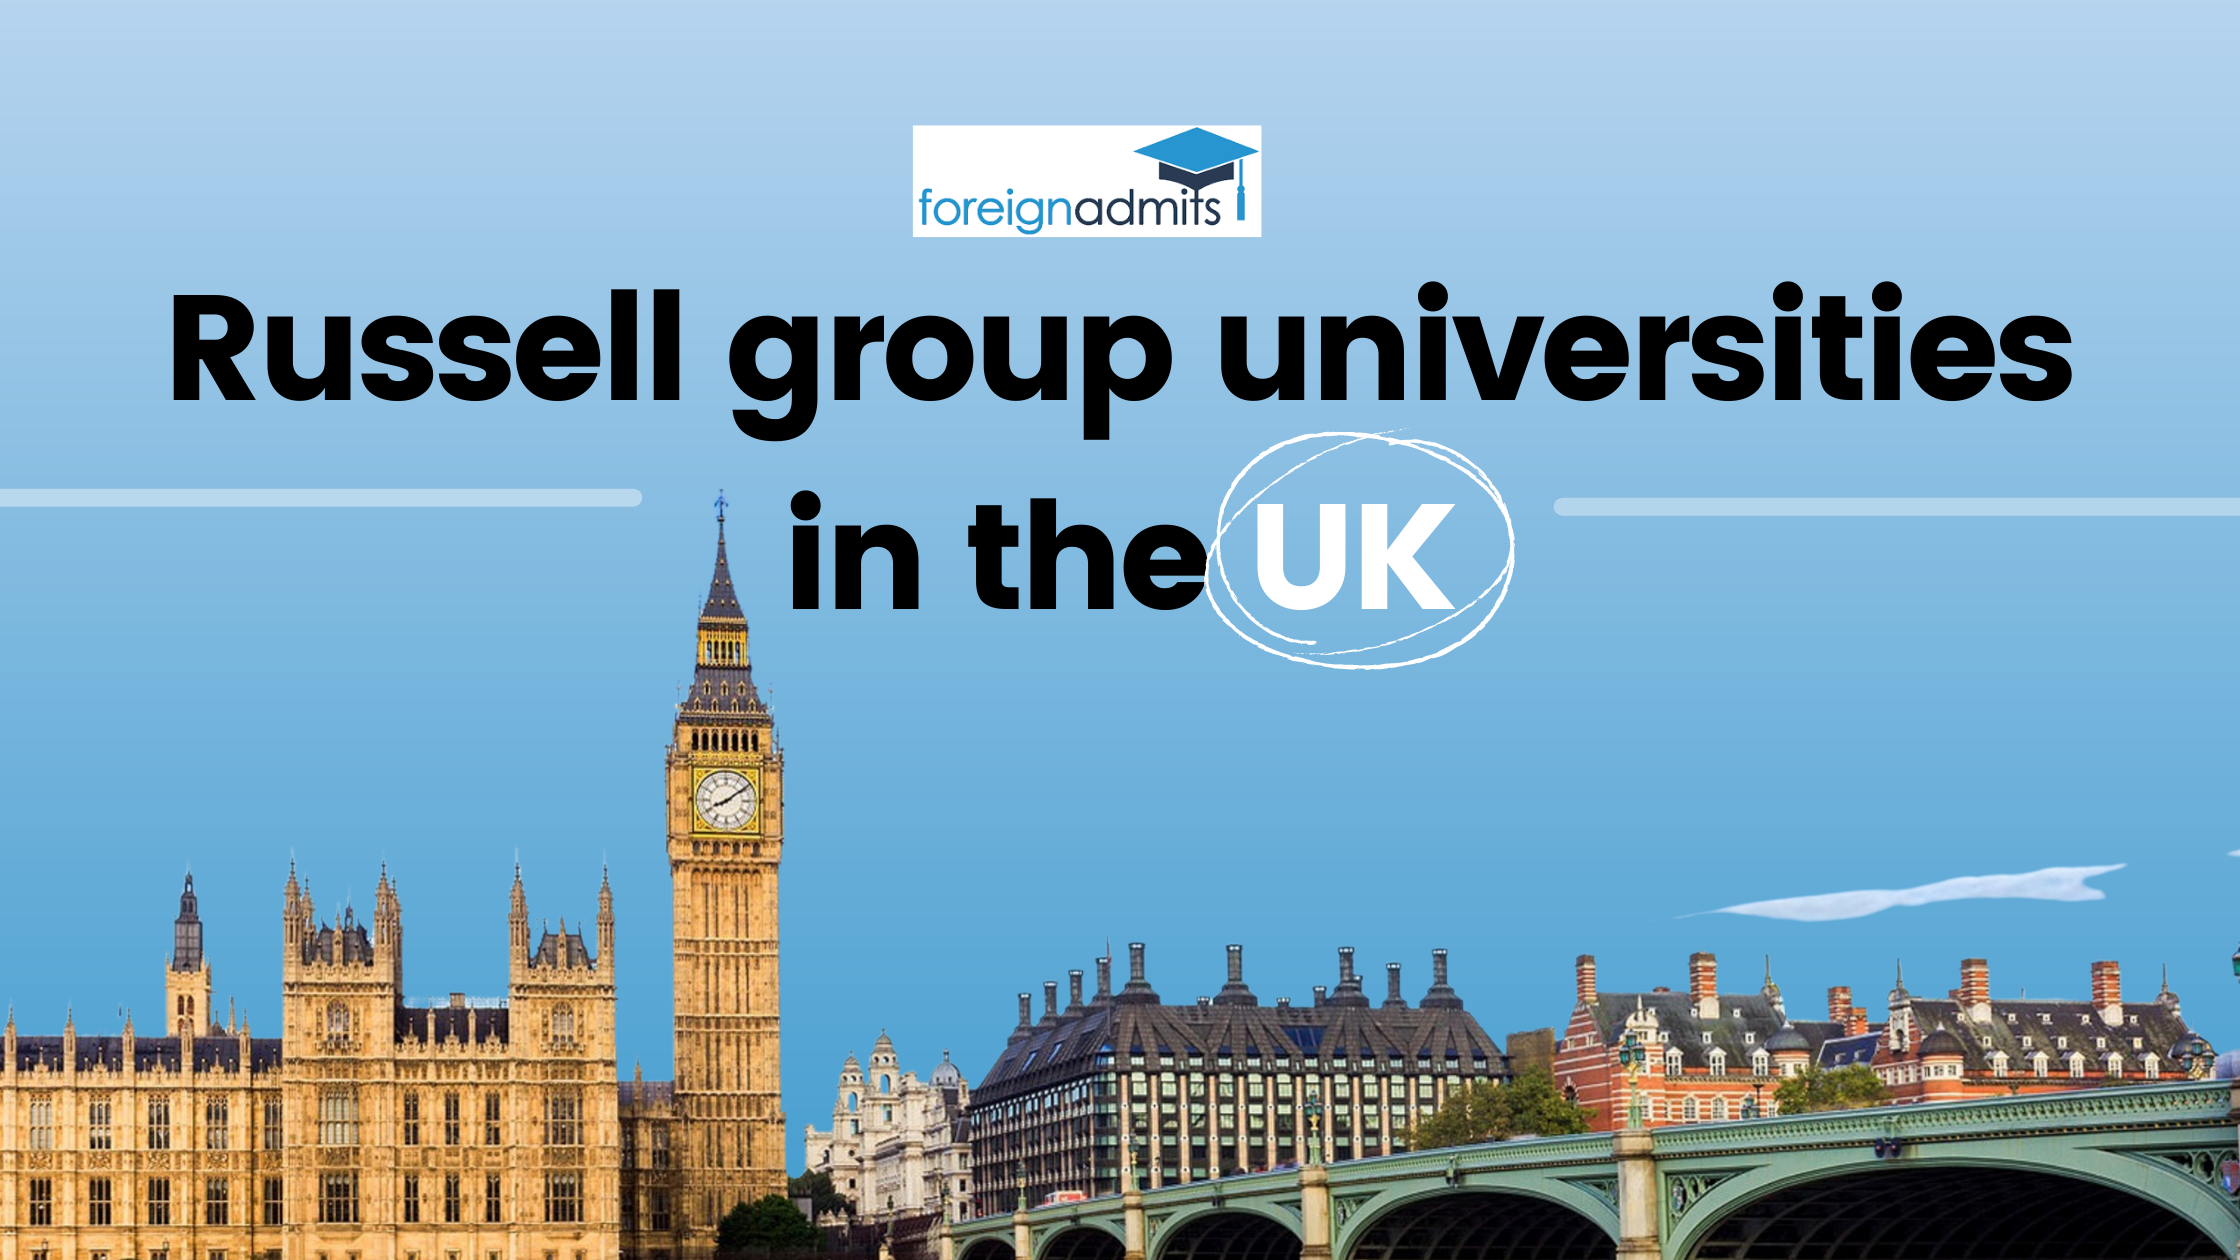 Russell group universities in the UK